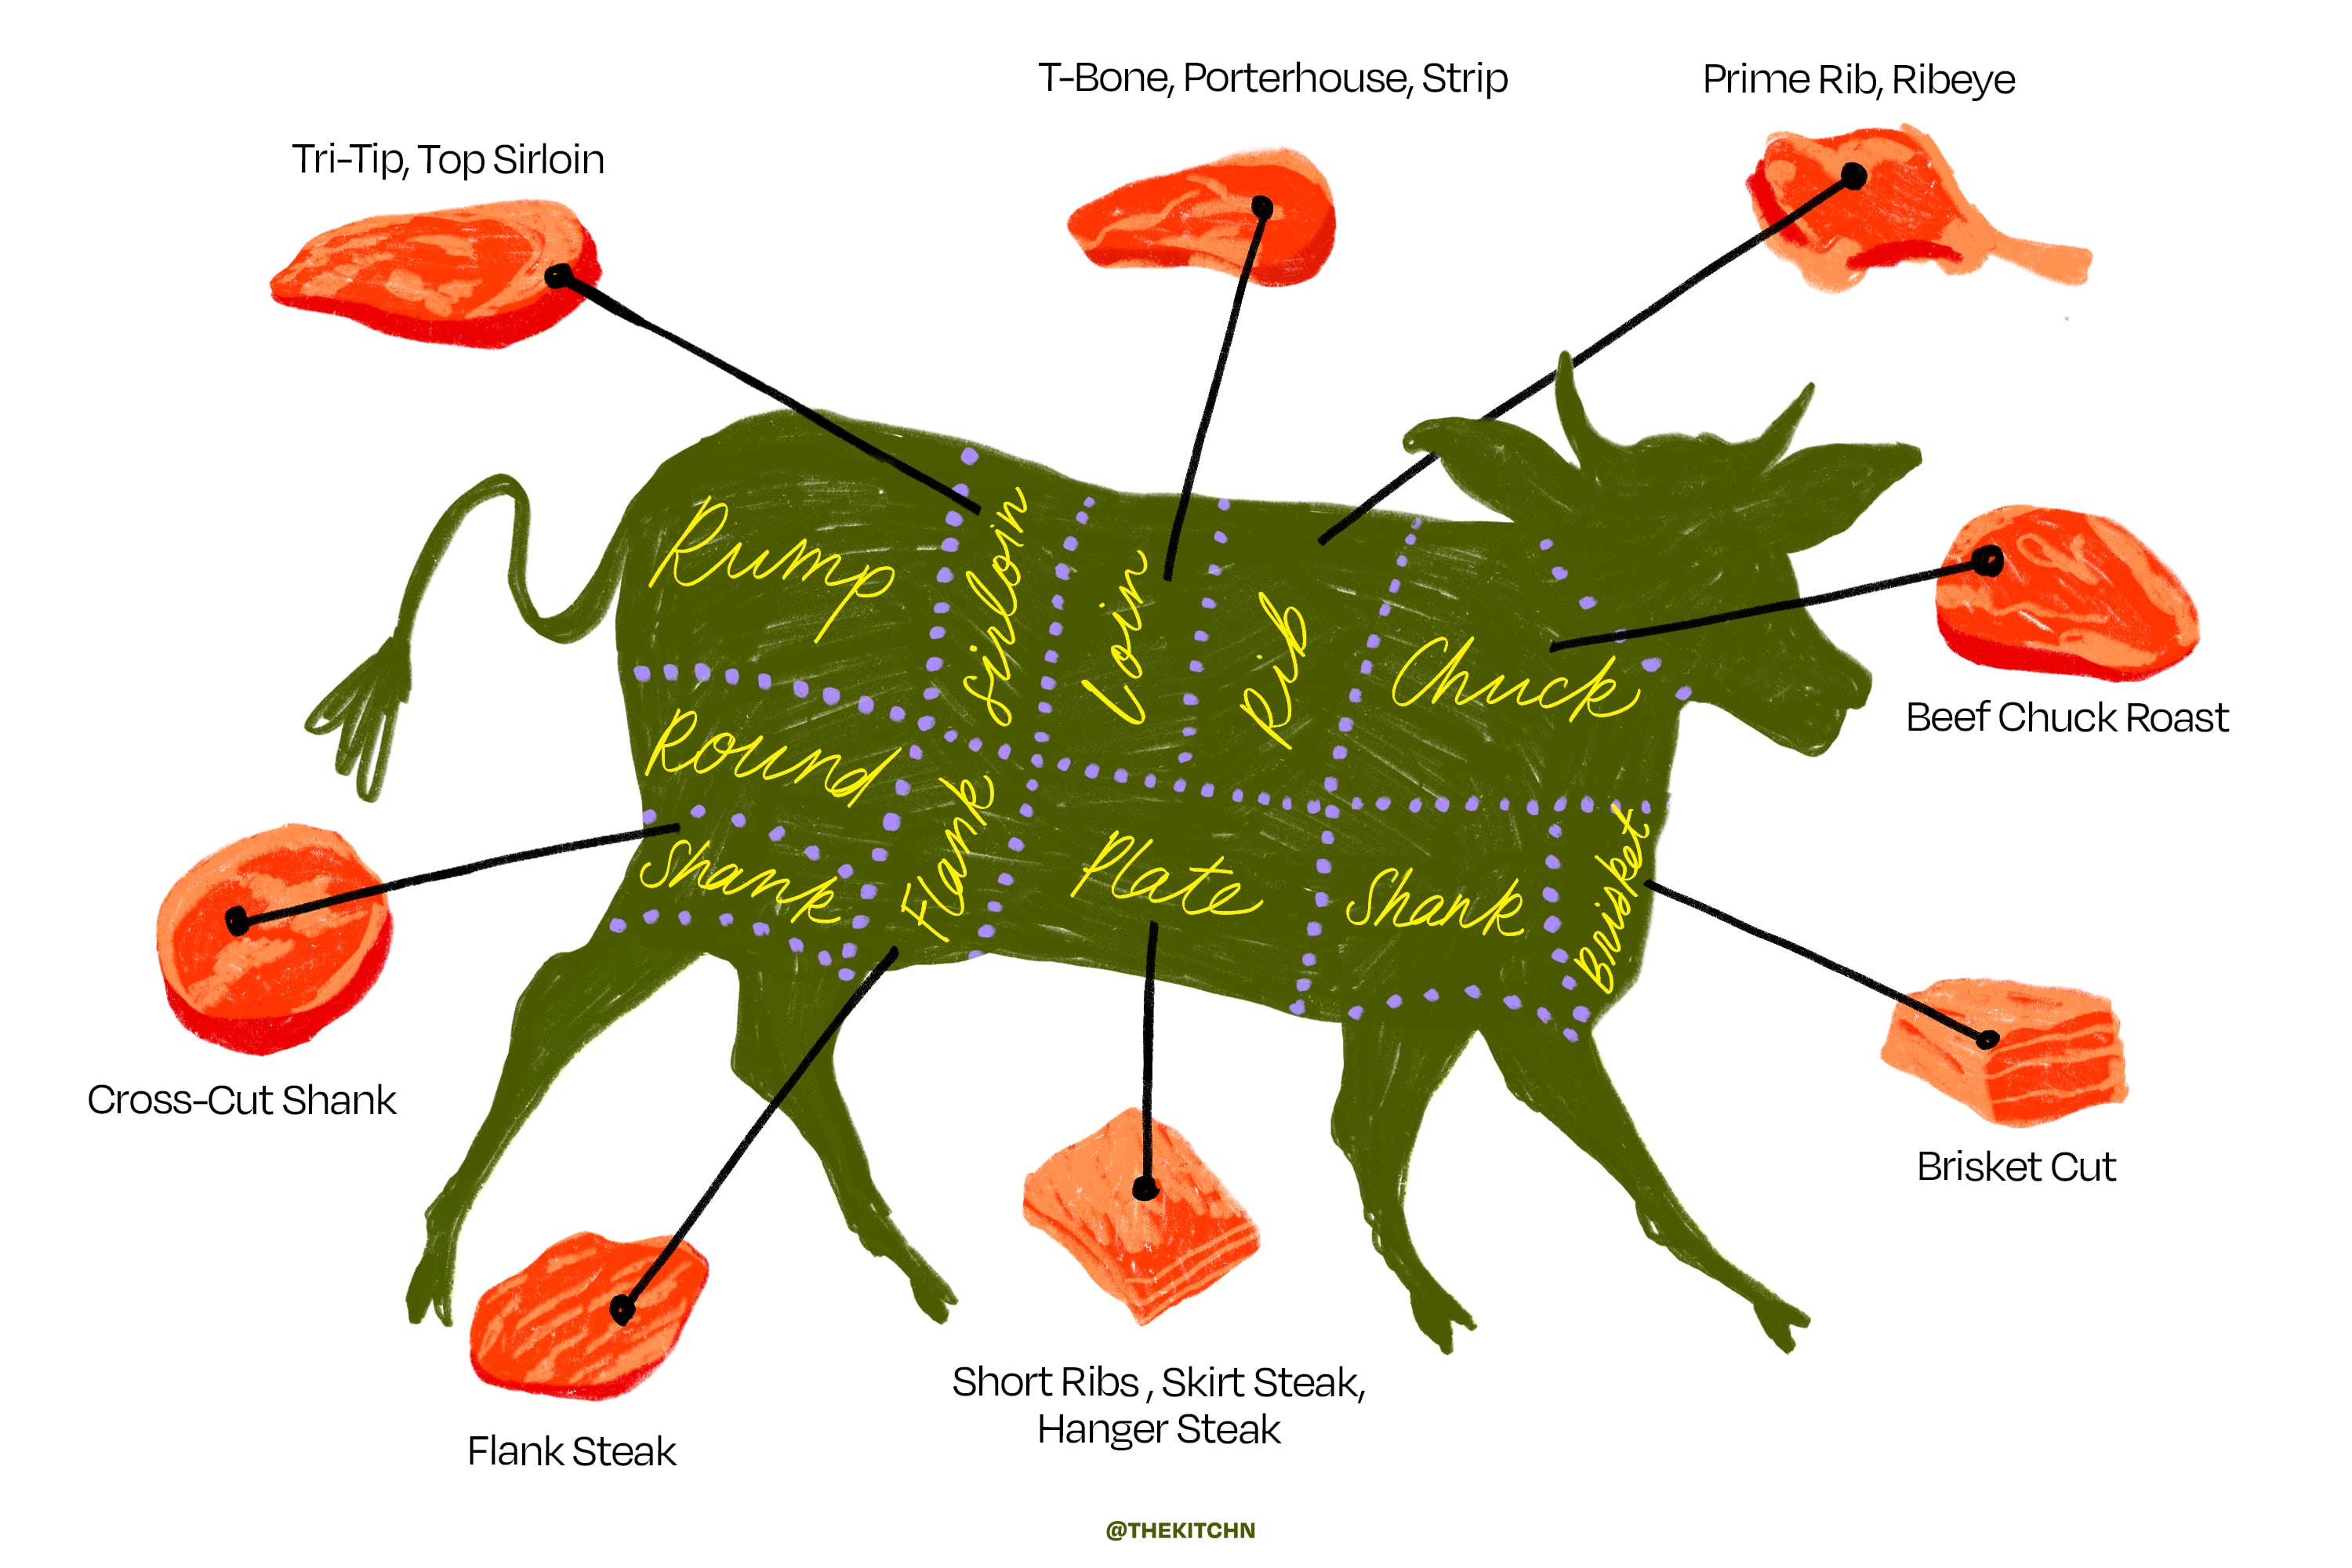 A Home Cook's Guide to All the Cuts of Beef to Know